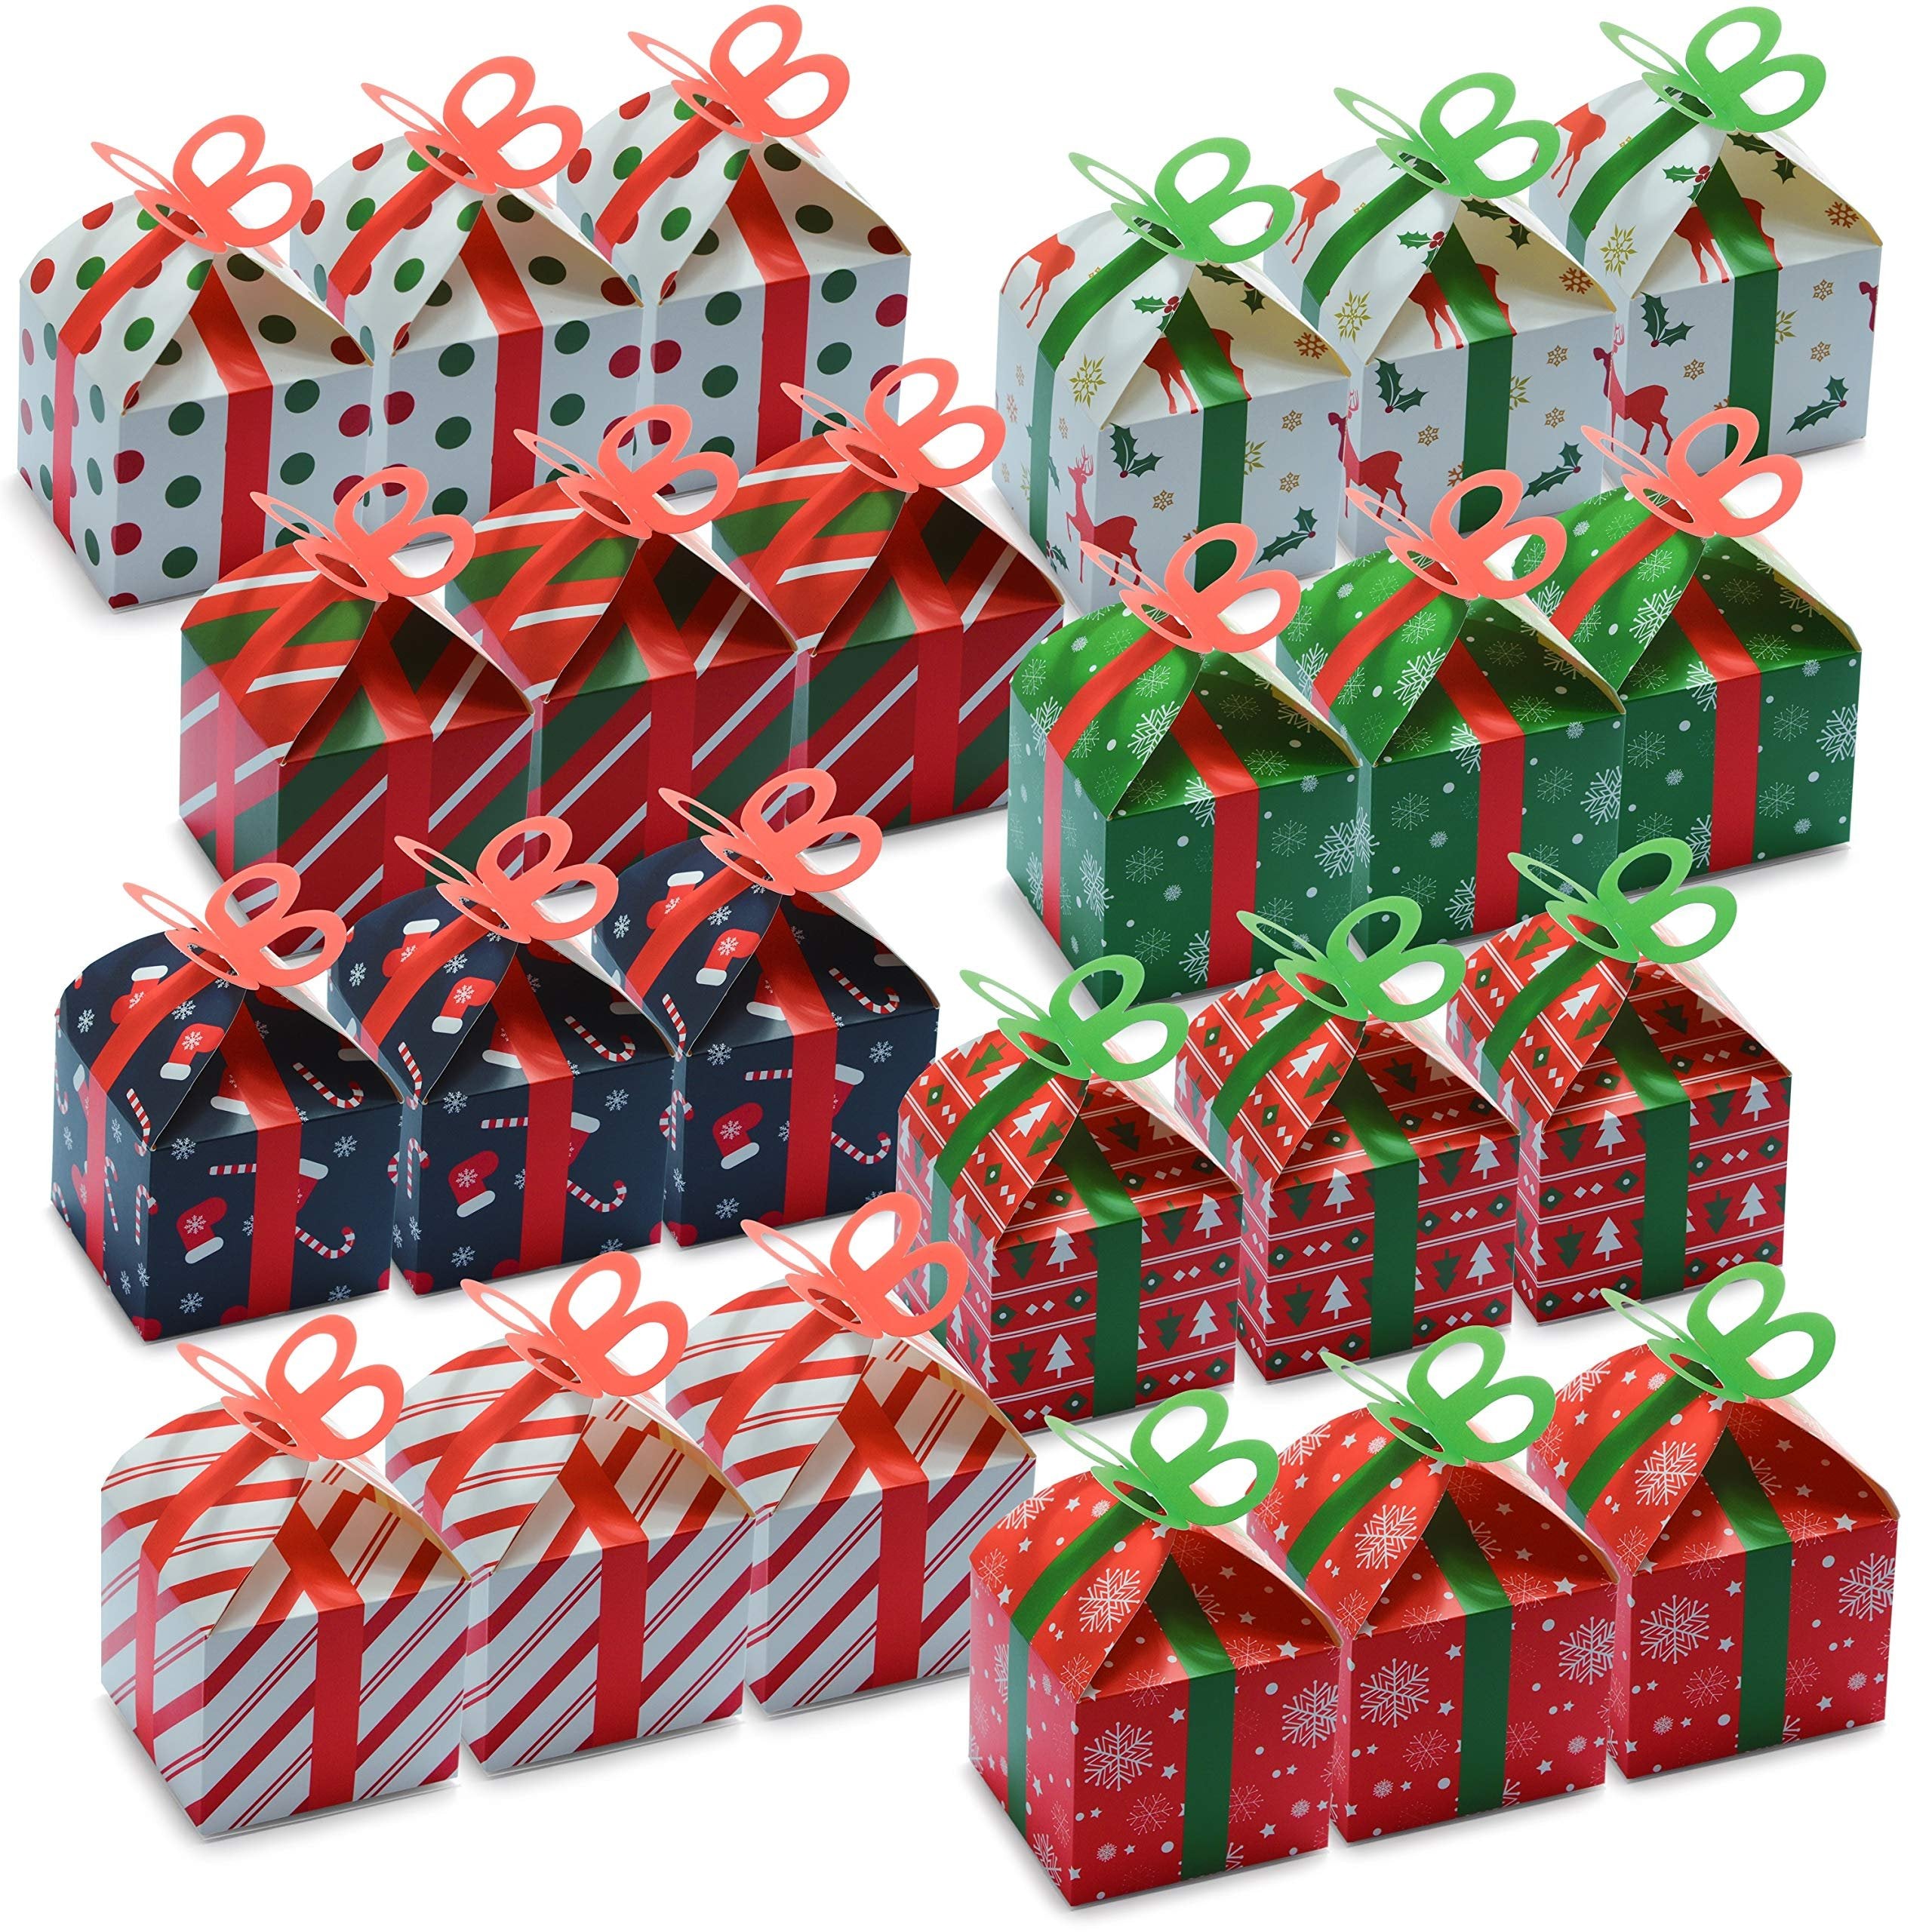 PREXTEX 24 Assorted 3D Christmas Small Gift Box Holiday Goodie Paper Boxes Xmas Treats Party Favors - 24 Pack | Great for Packaging Treat, Candy, Cupcake, Birthday Gift, and Other Party Favor Items